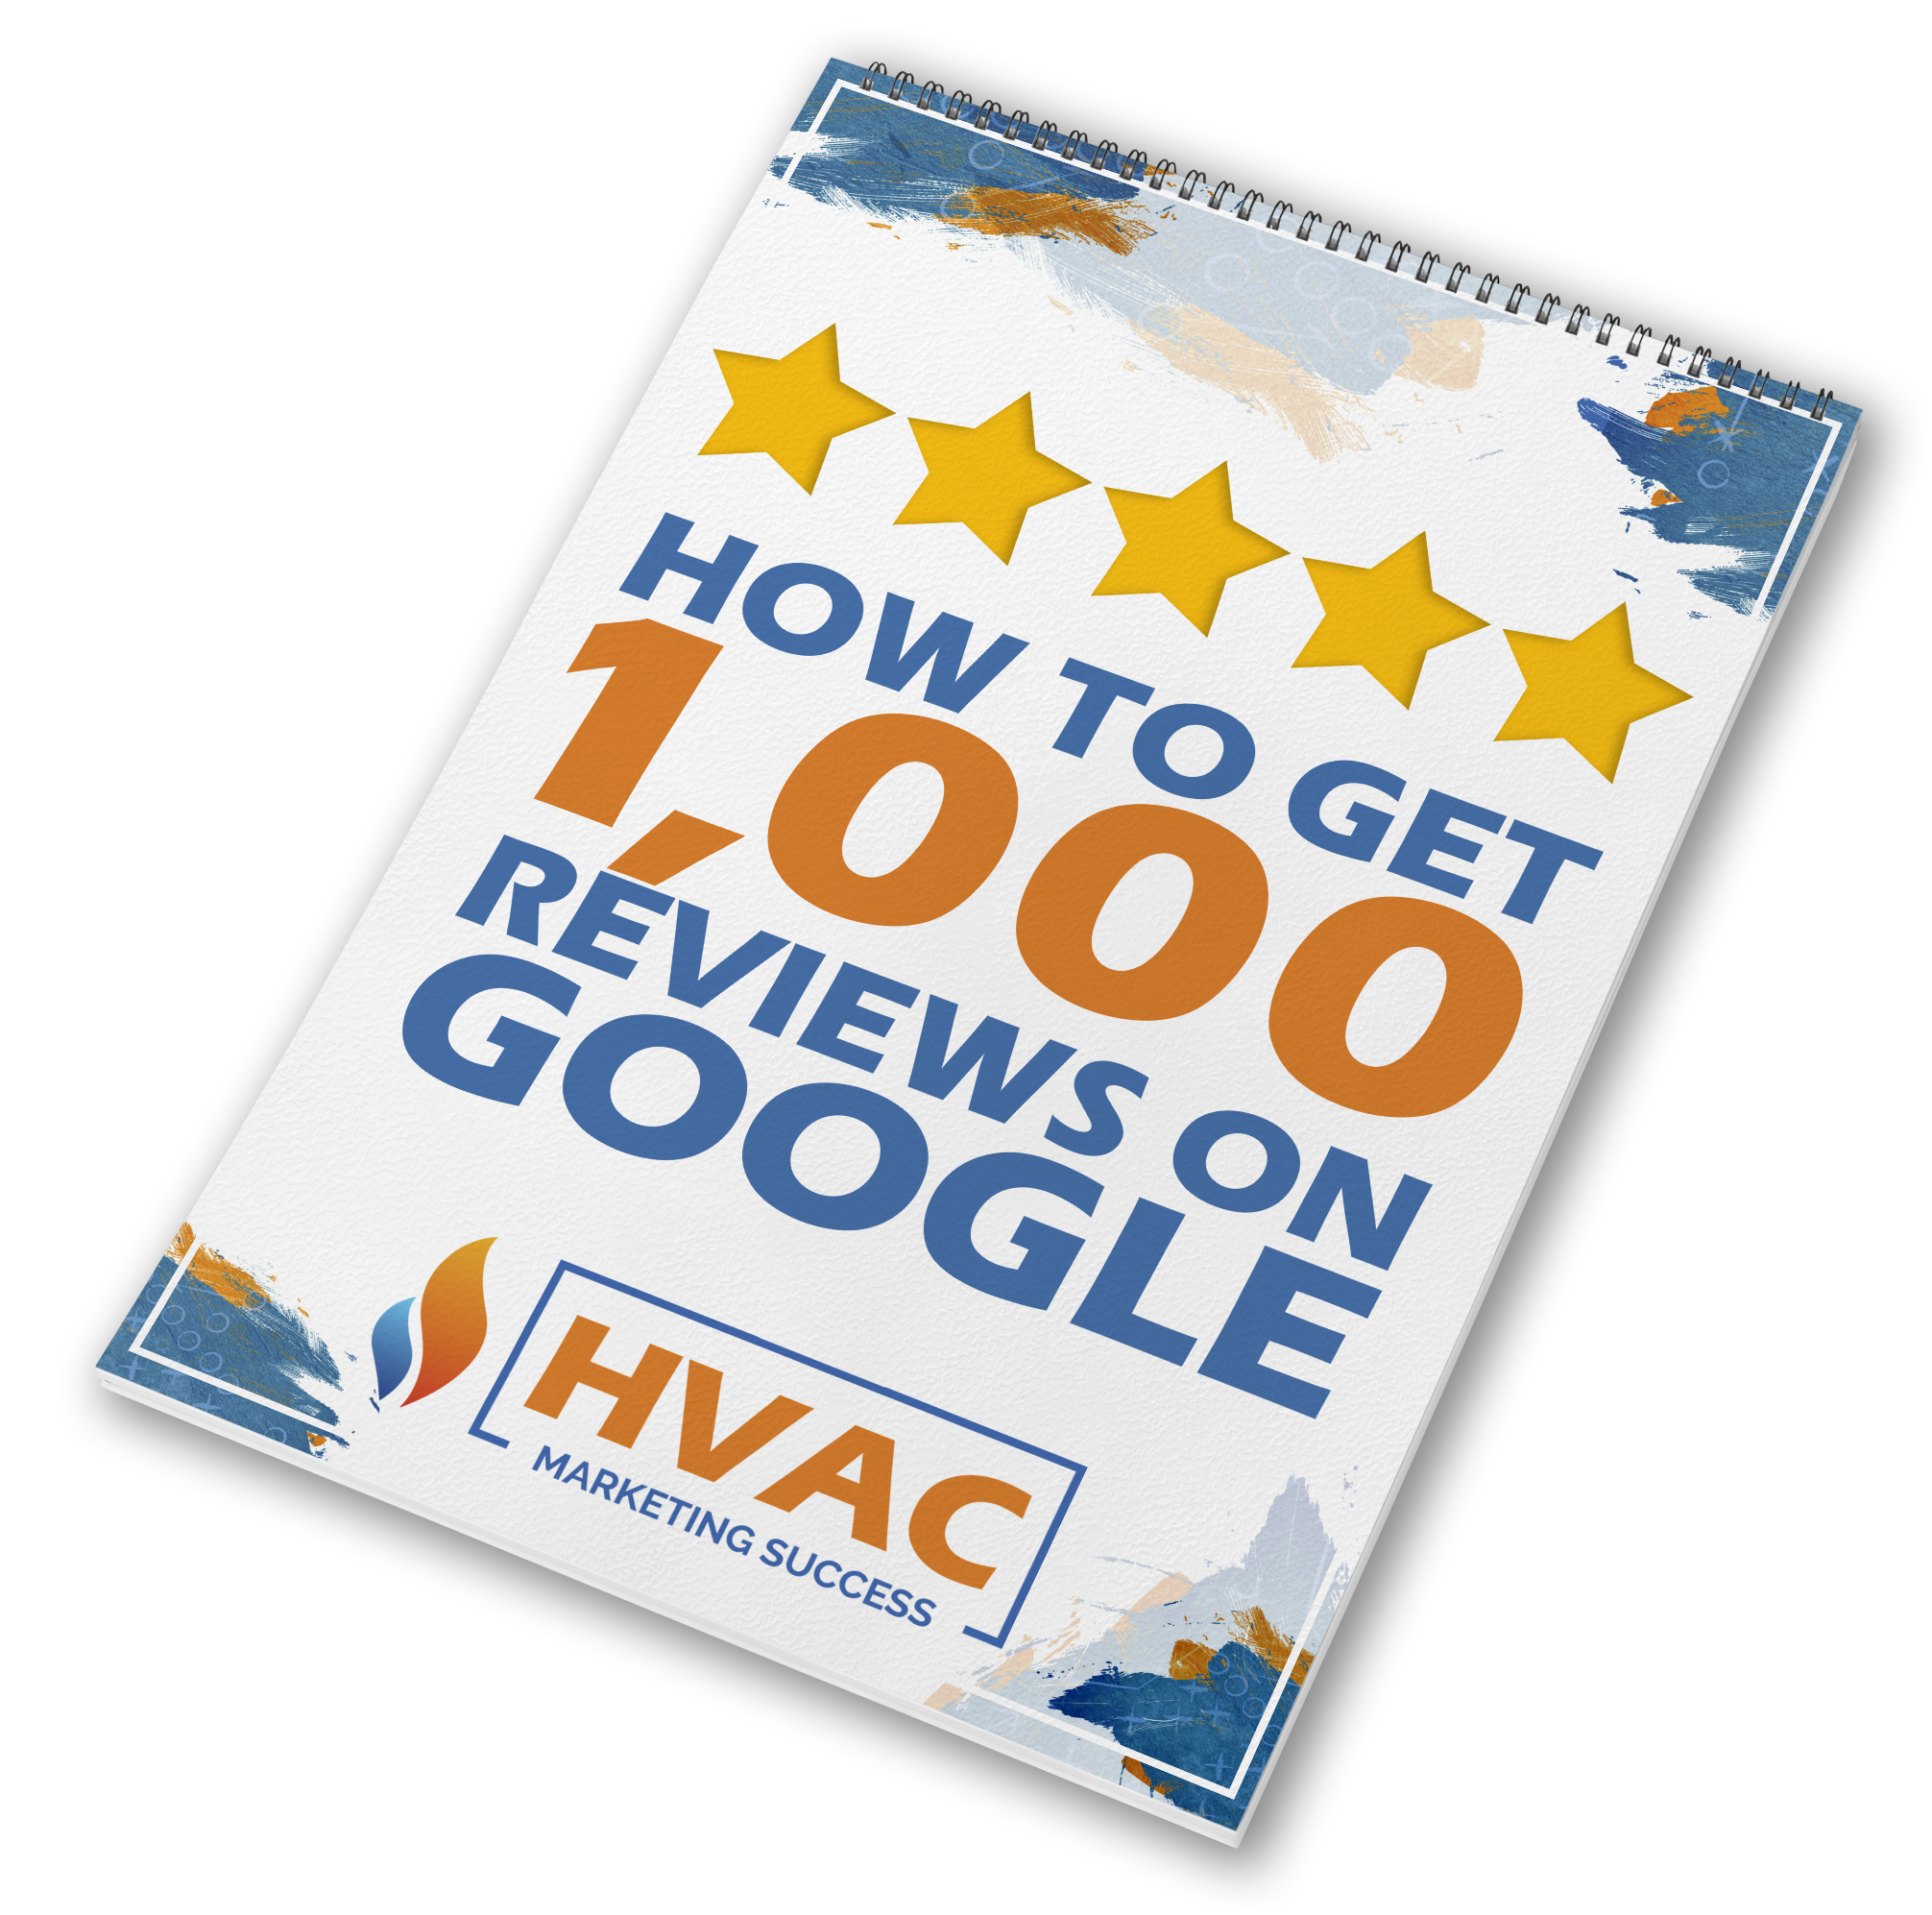 Guide to getting 1000 Google Reviews for HVAC companies FREE